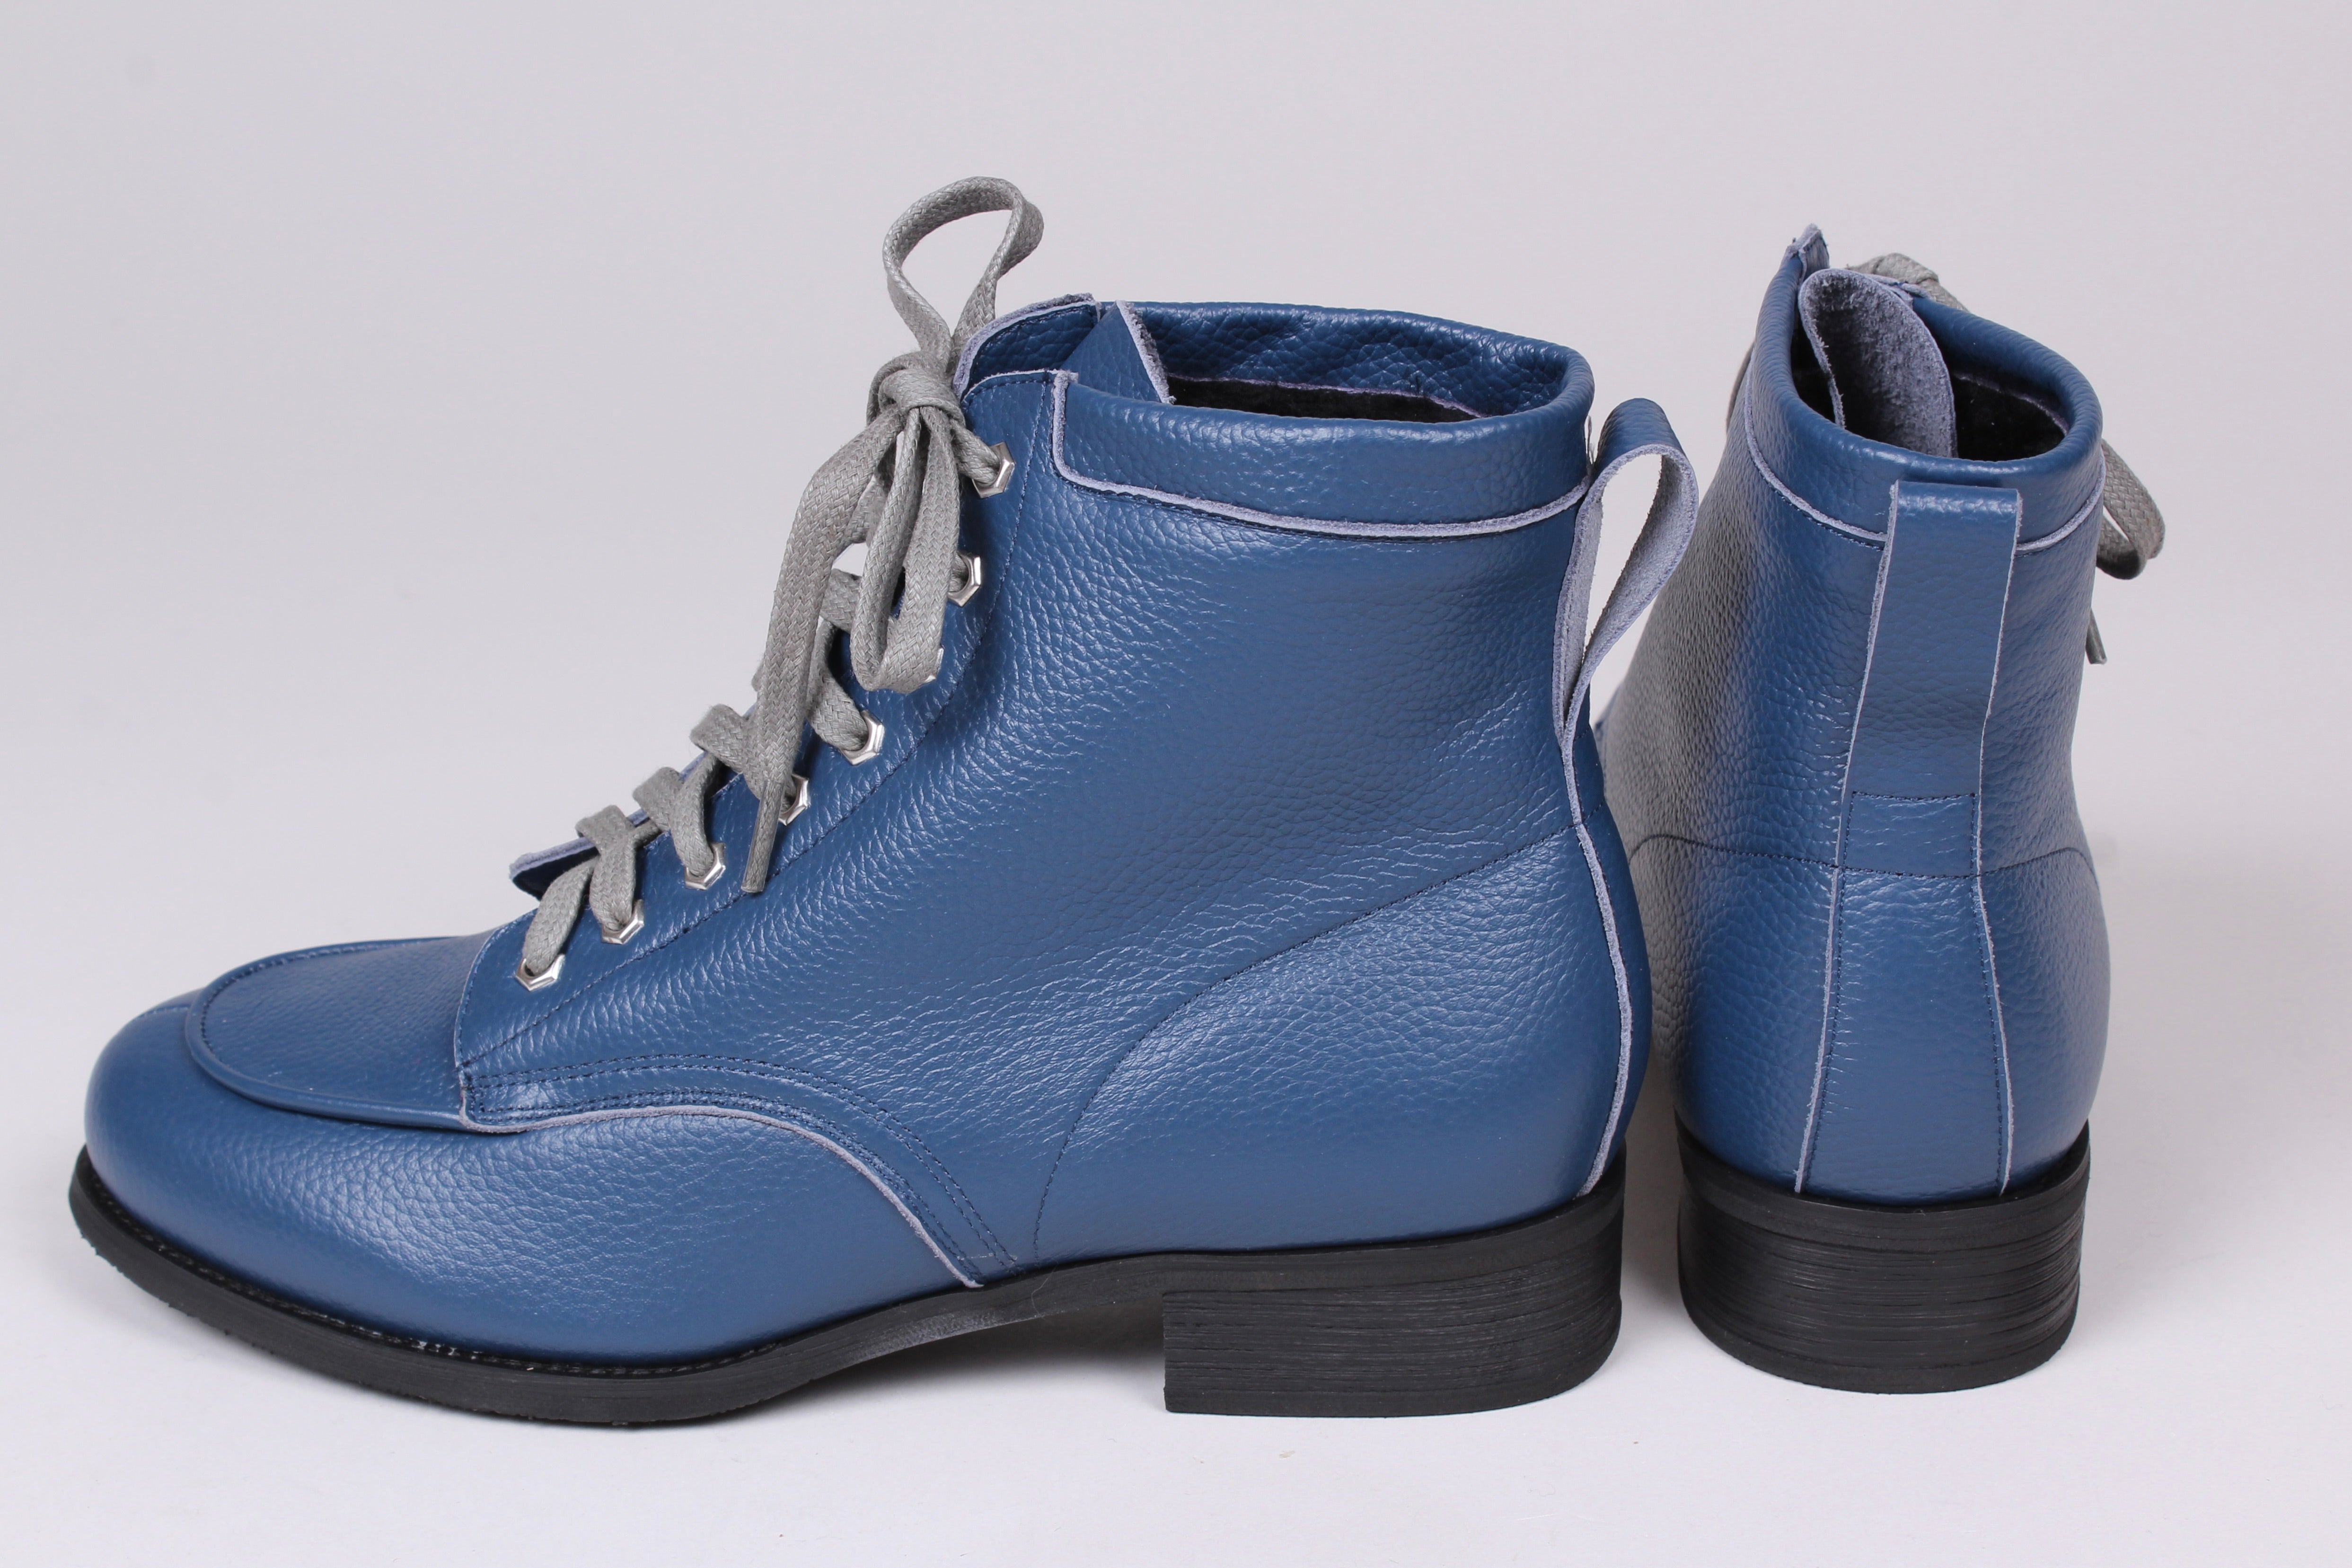 Soft late 1930s /1940s style winter snow boots with fur - Blue - Rita